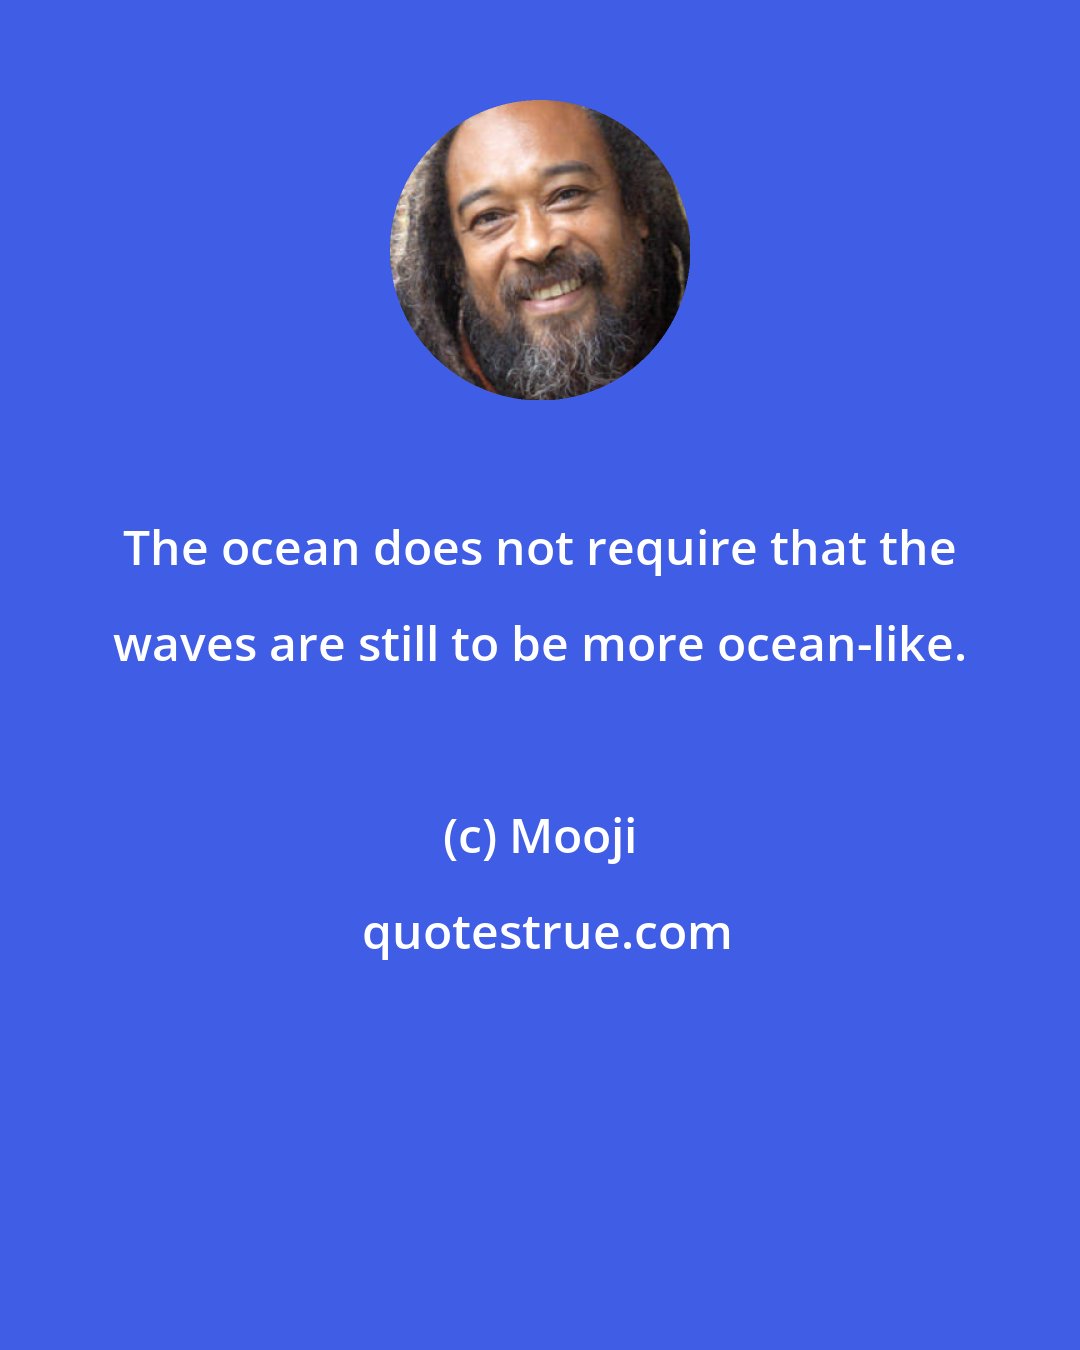 Mooji: The ocean does not require that the waves are still to be more ocean-like.